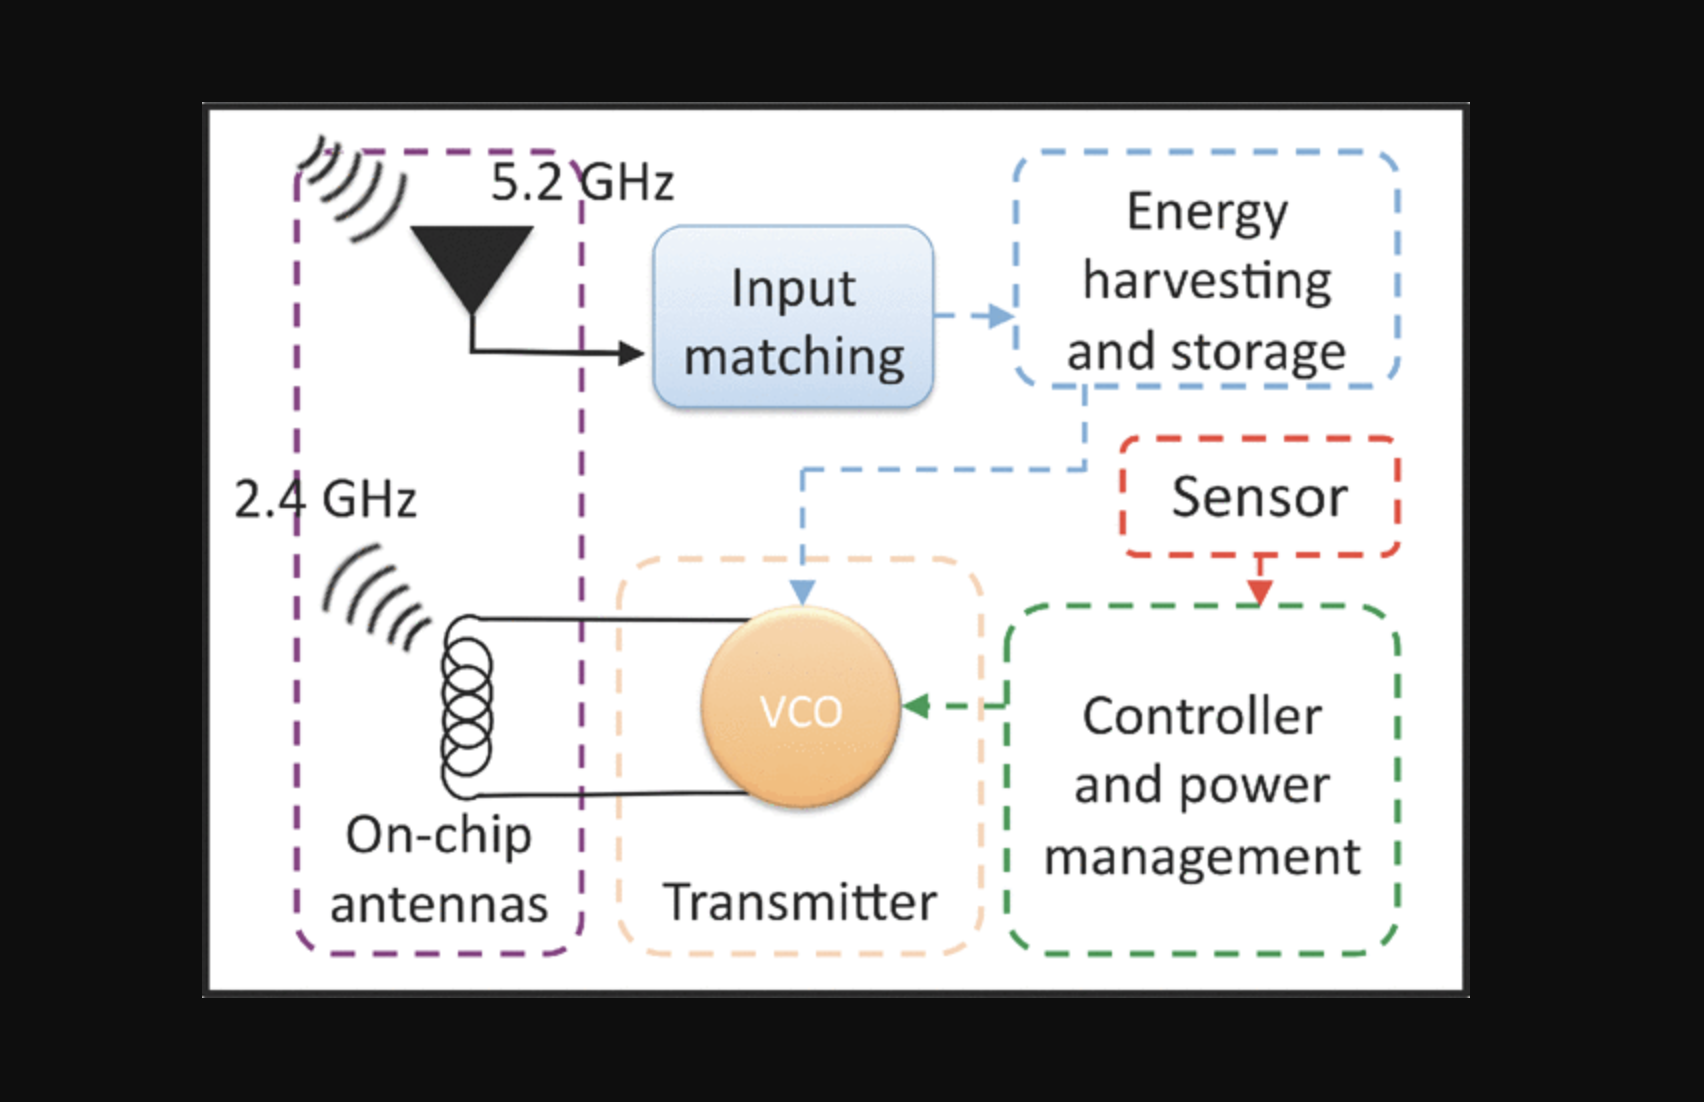 On-chip implantable antennas for wireless power and data transfer in a glaucoma-monitoring SoC